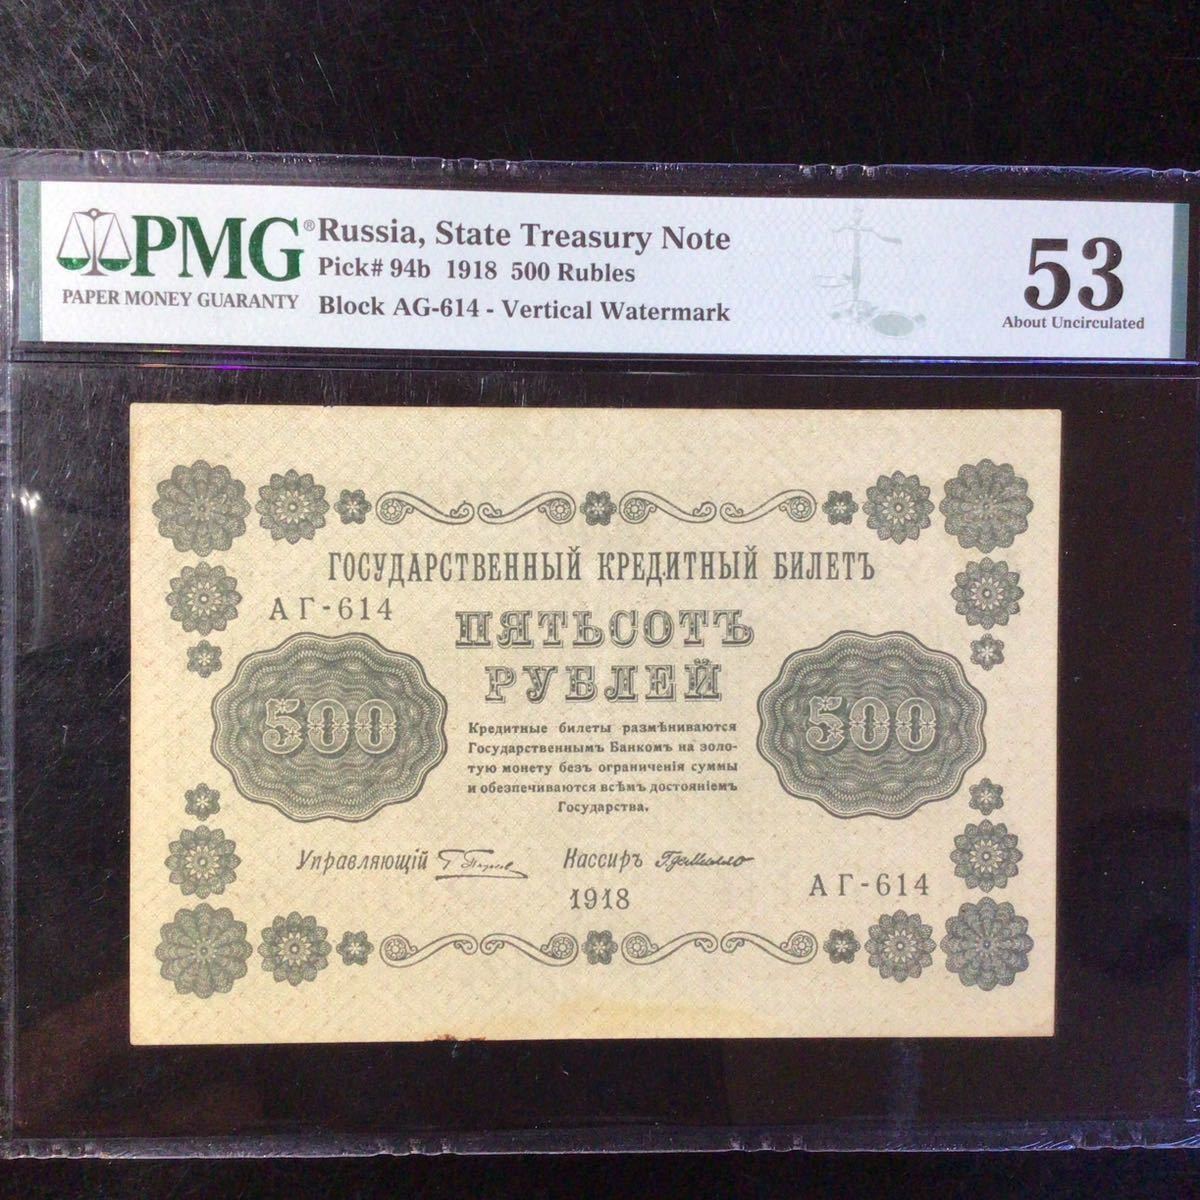 World Banknote Grading RUSSIA《State Treasury Note》500 Rubles【1918】『PMG Grading About Uncirculated 53』